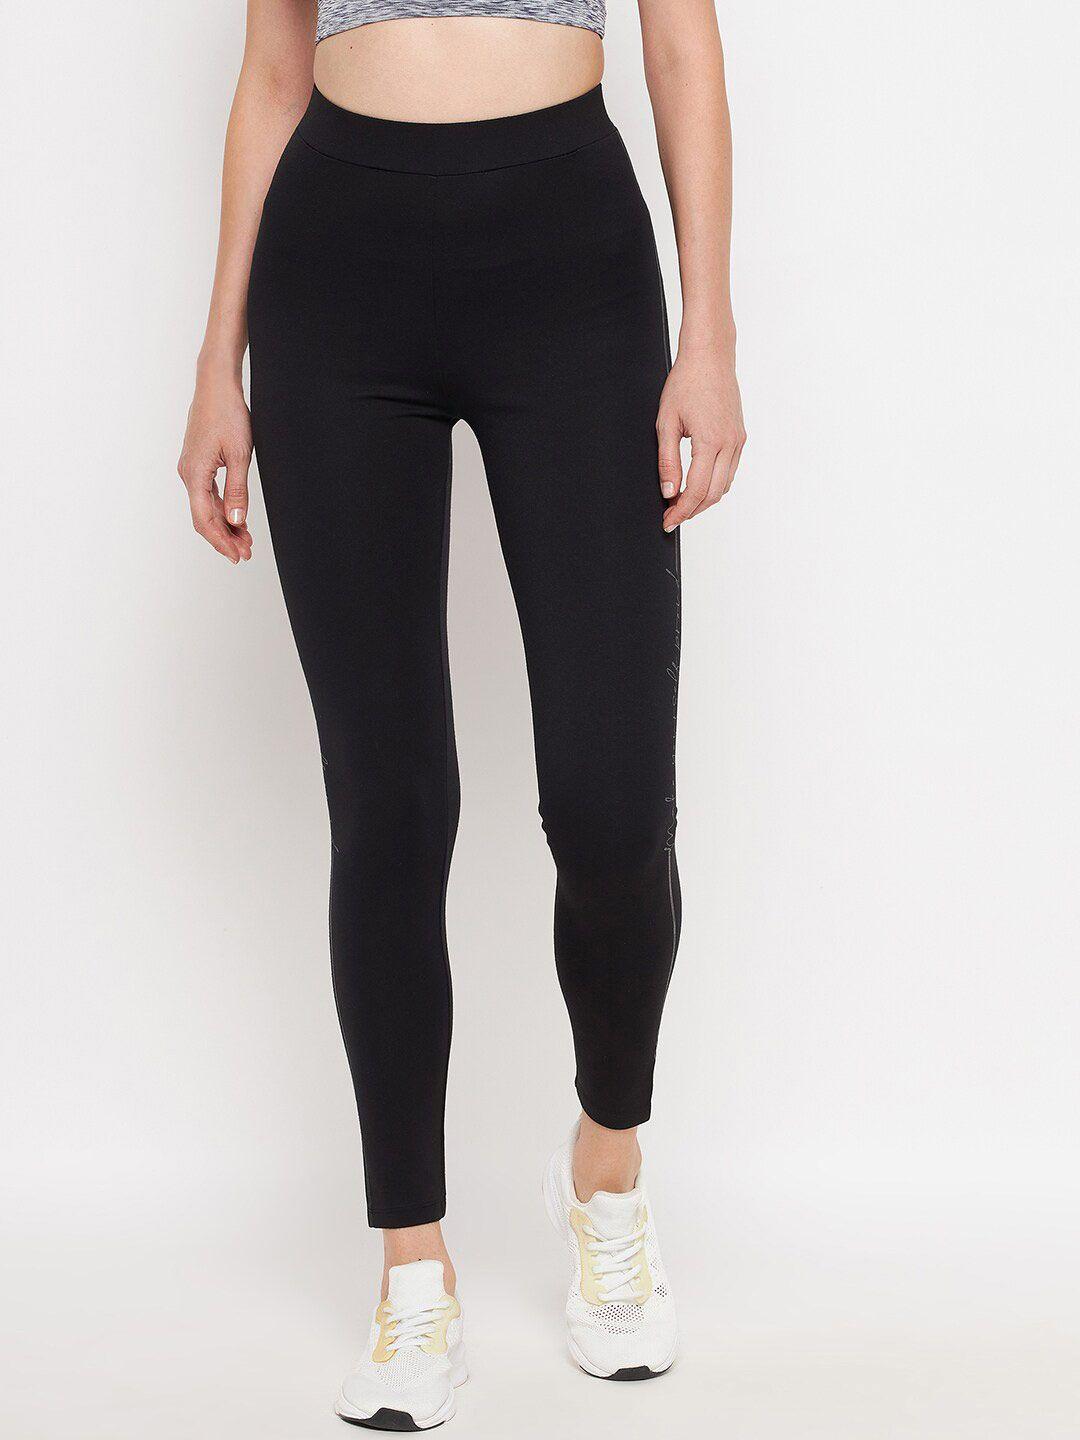 madame-woman-black-solid-cotton-jeggings